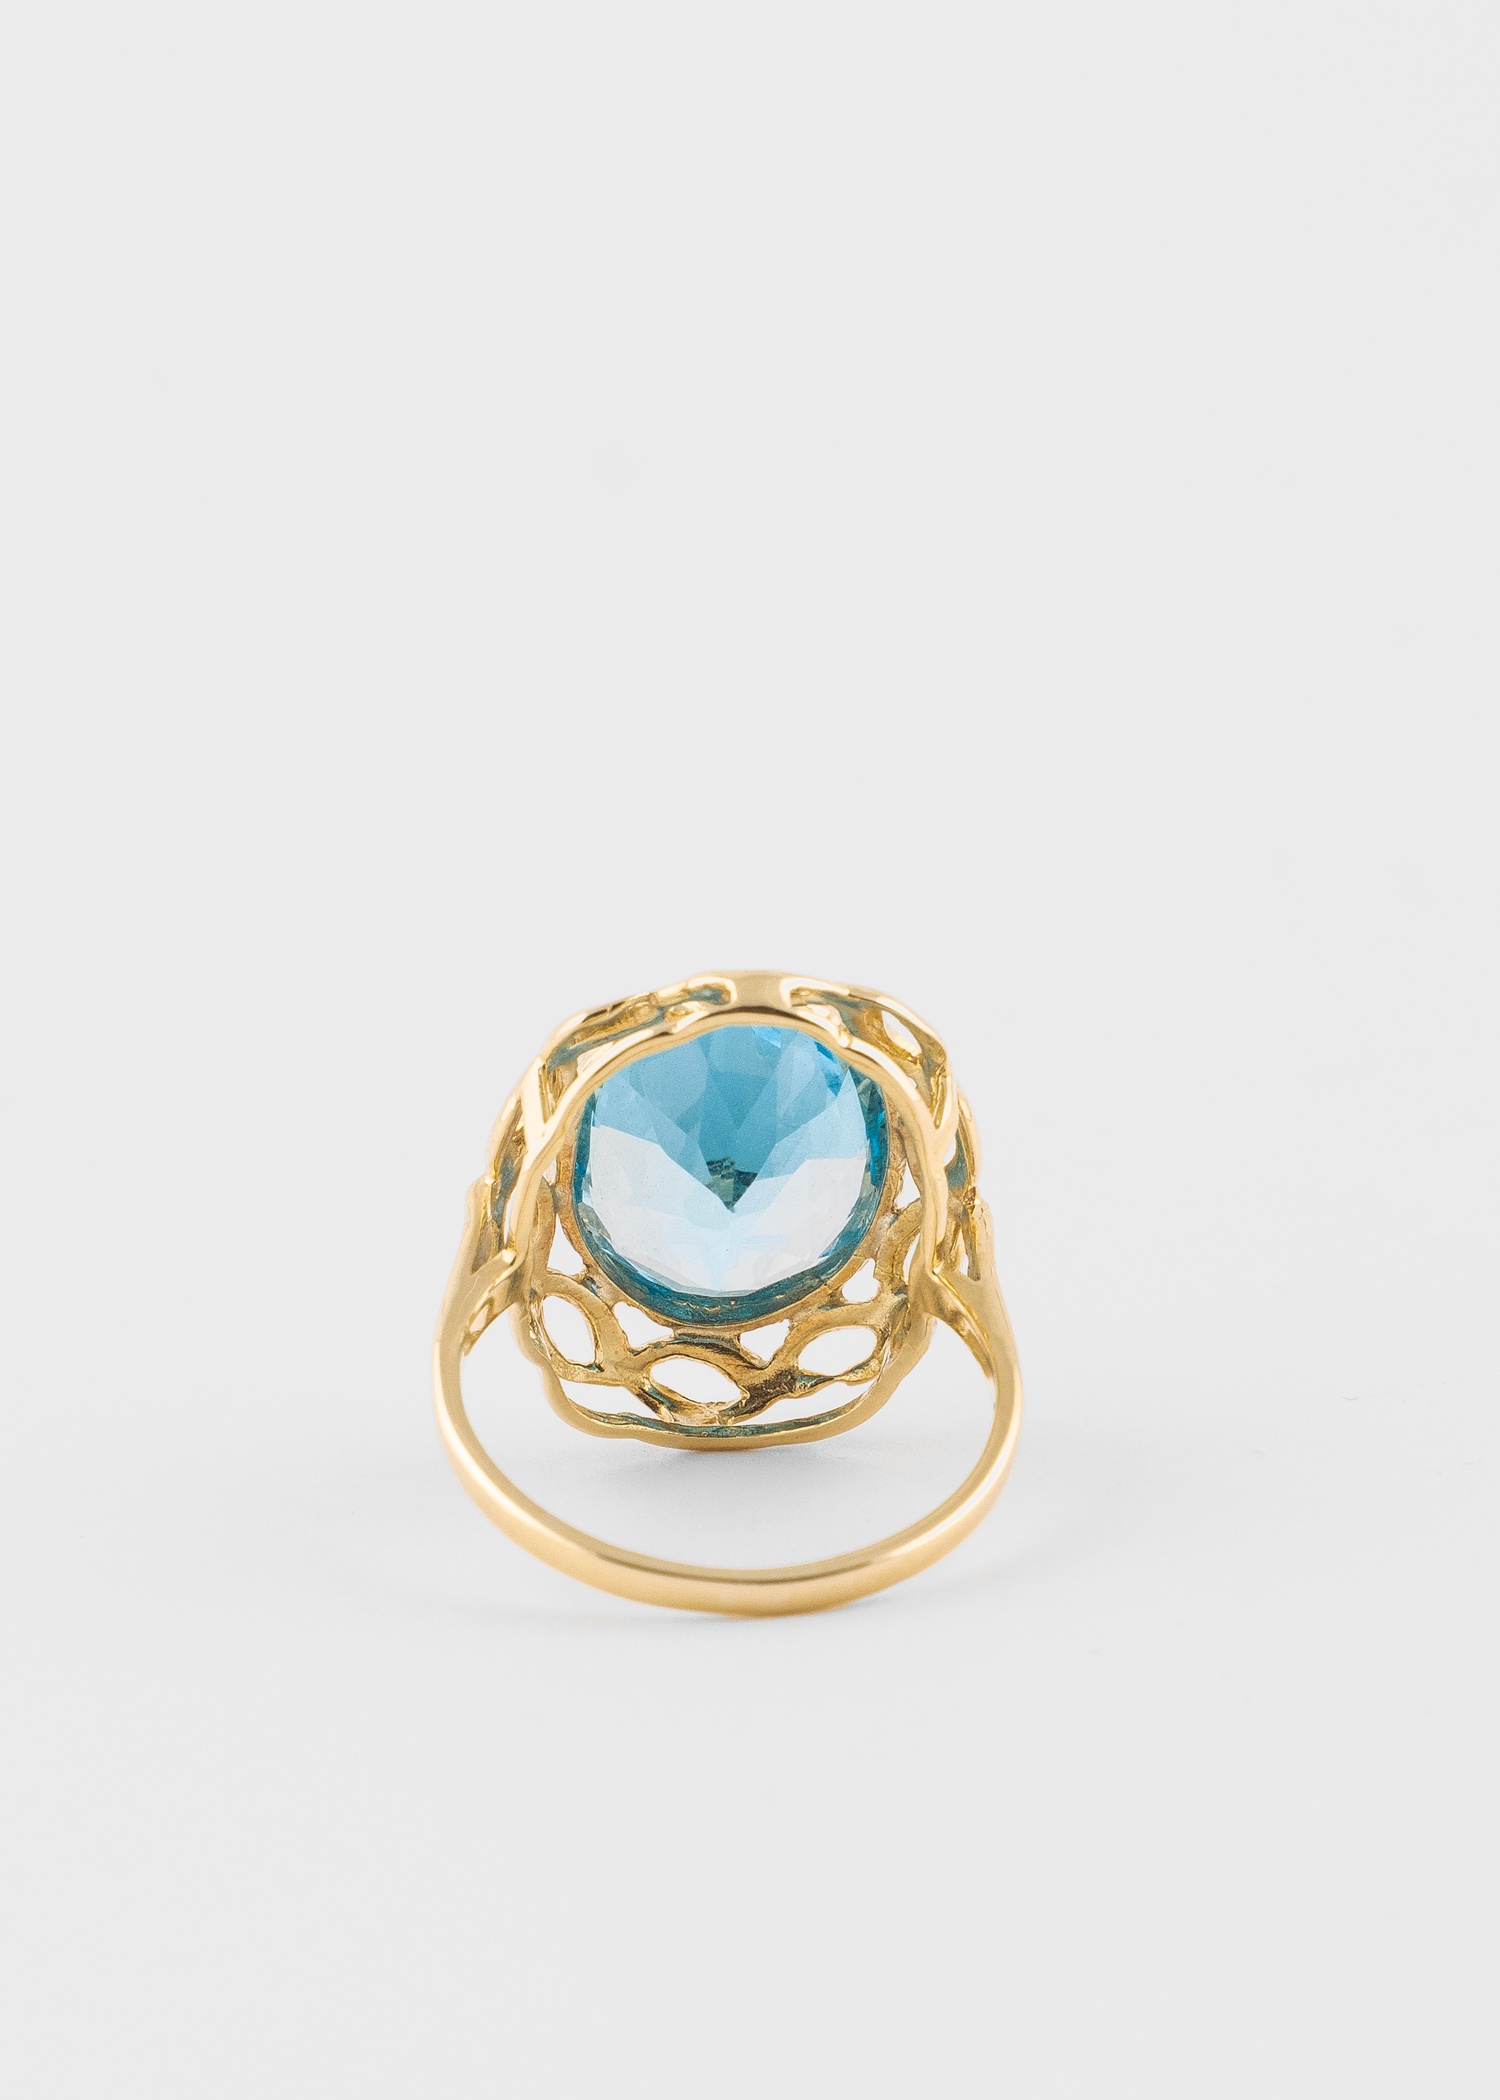 'Enormous Sky Blue Topaz' Gold Cocktail Ring - 4